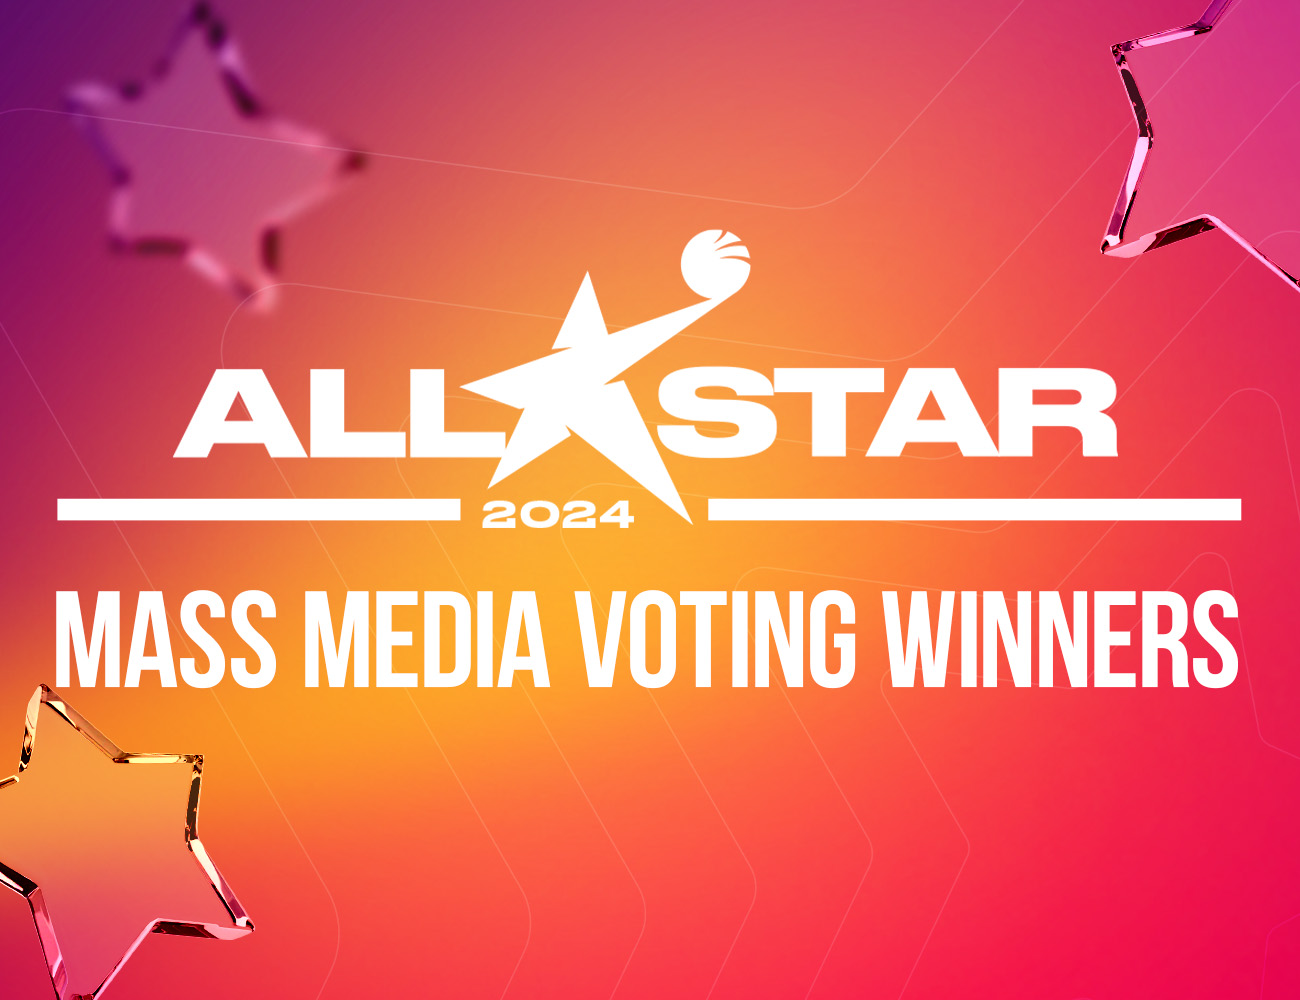 The second stage of the AllStar Game 2024 voting is over. The media